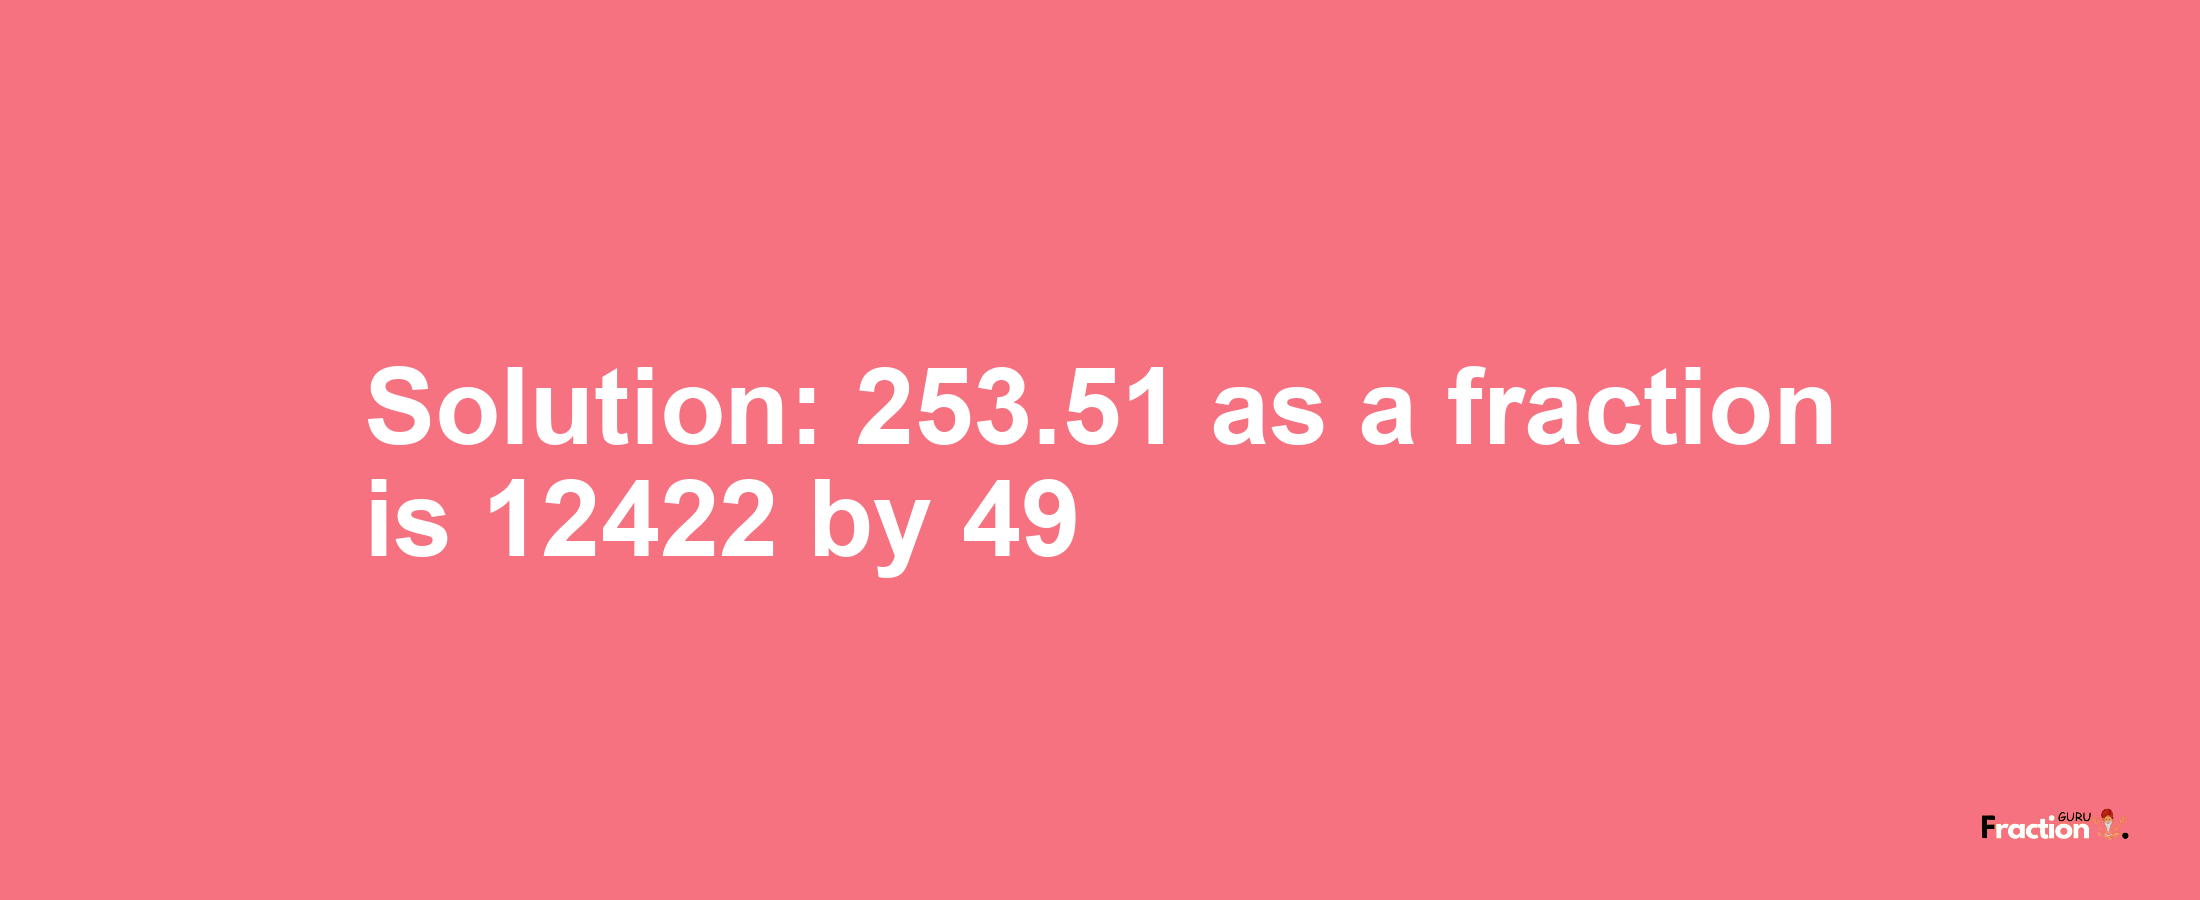 Solution:253.51 as a fraction is 12422/49